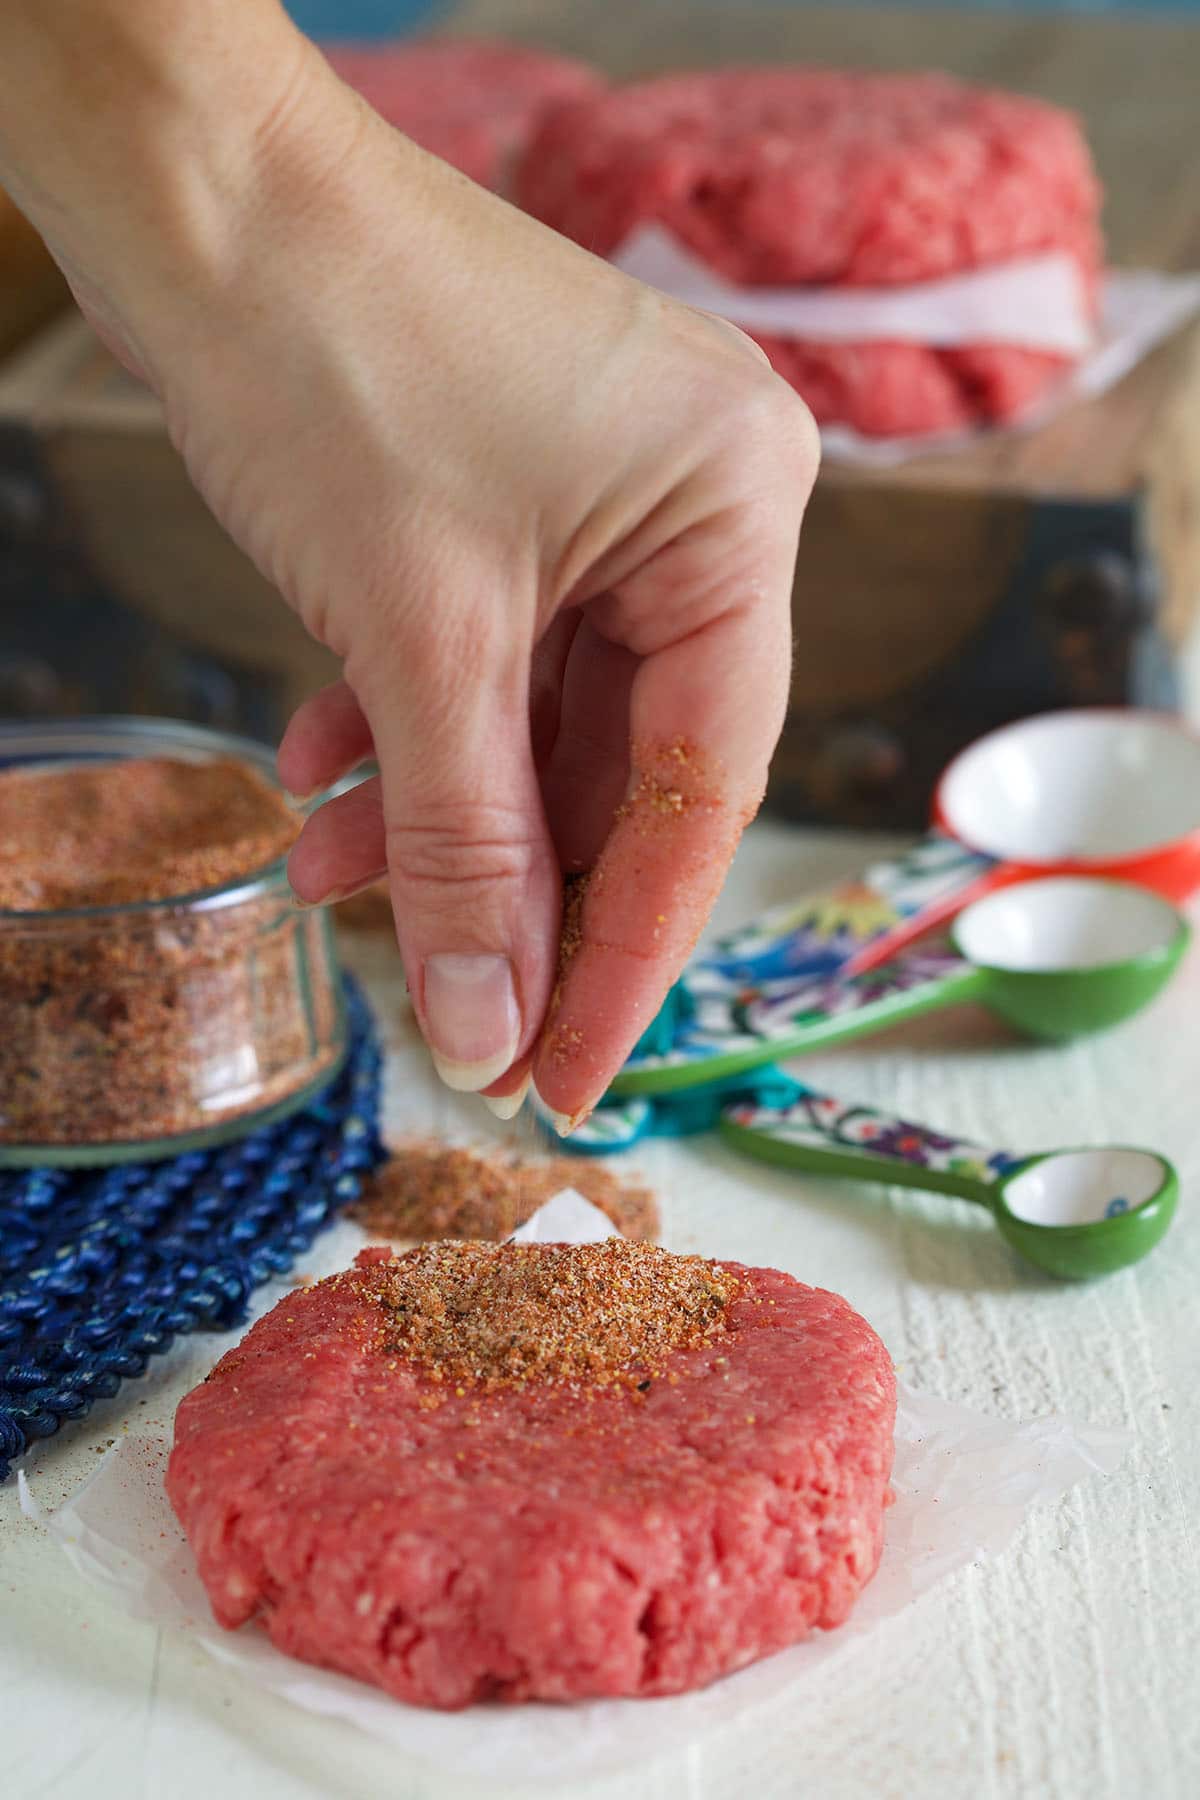 Seasoning is being sprinkled on top of a hamburger patty.